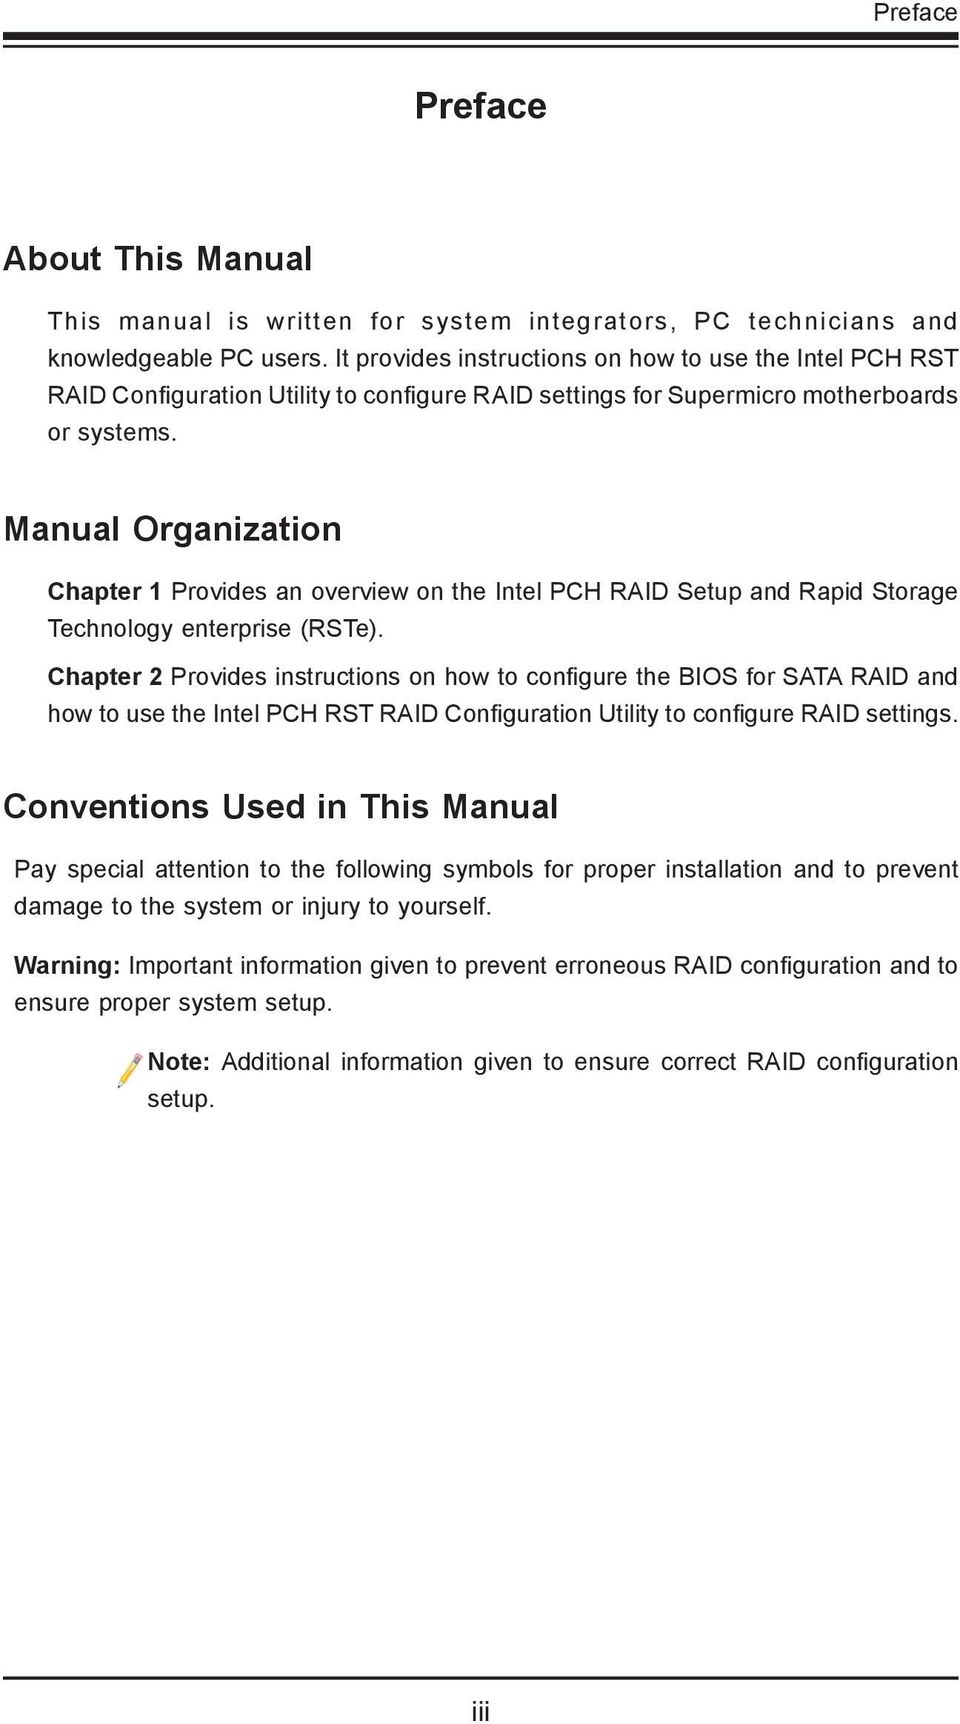 Manual Organization Chapter 1 Provides an overview on the Intel PCH RAID Setup and Rapid Storage Technology enterprise (RSTe).